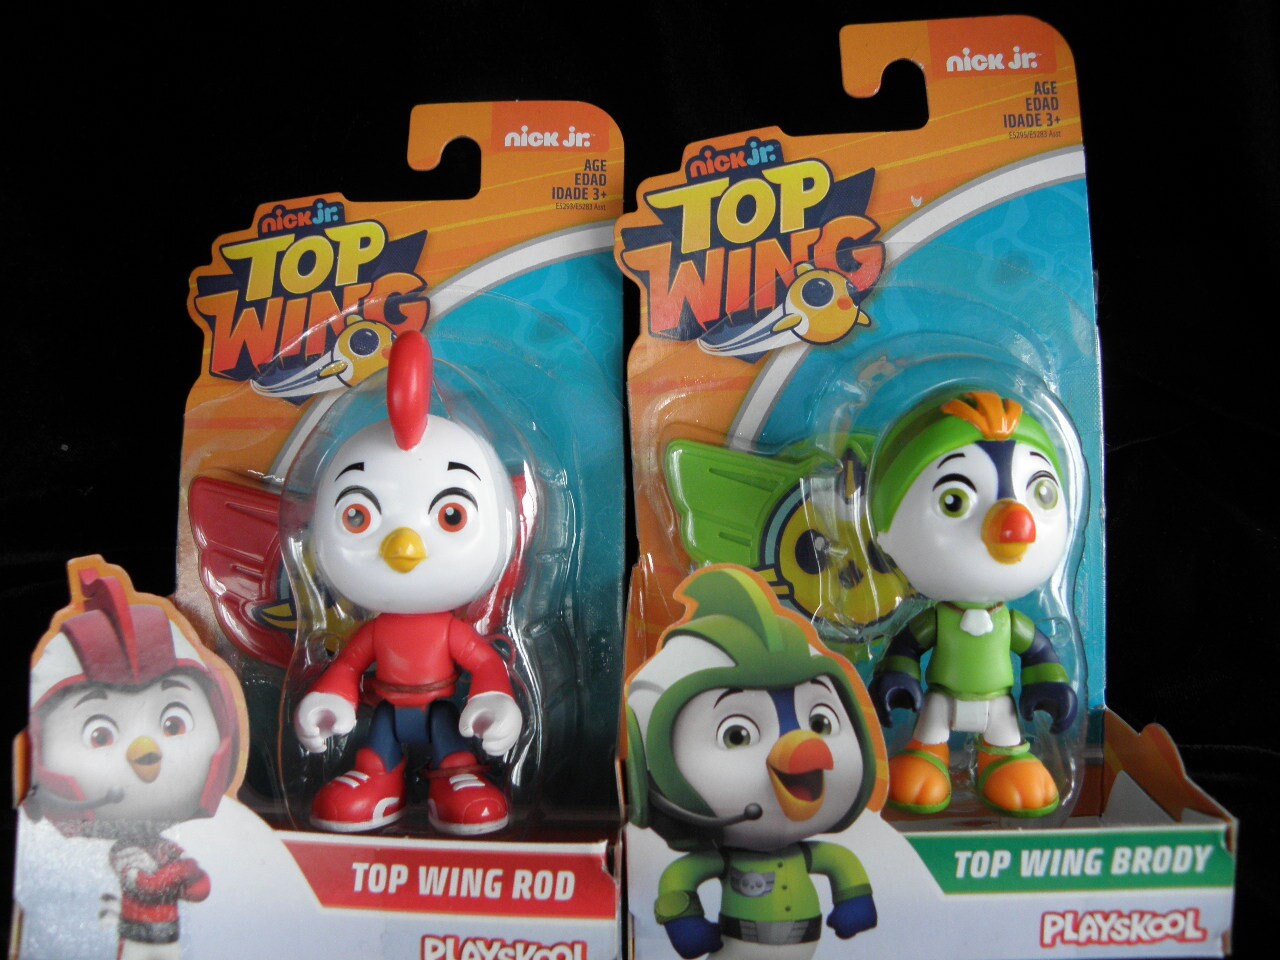 2 Top Wing Rod and Brody, Action Figures Figures, Wearable Badge, NEW,  SIOP, Nick Jr. Playskool Figu Toy, 2018 Hasbro, Inexpensive Shipping 